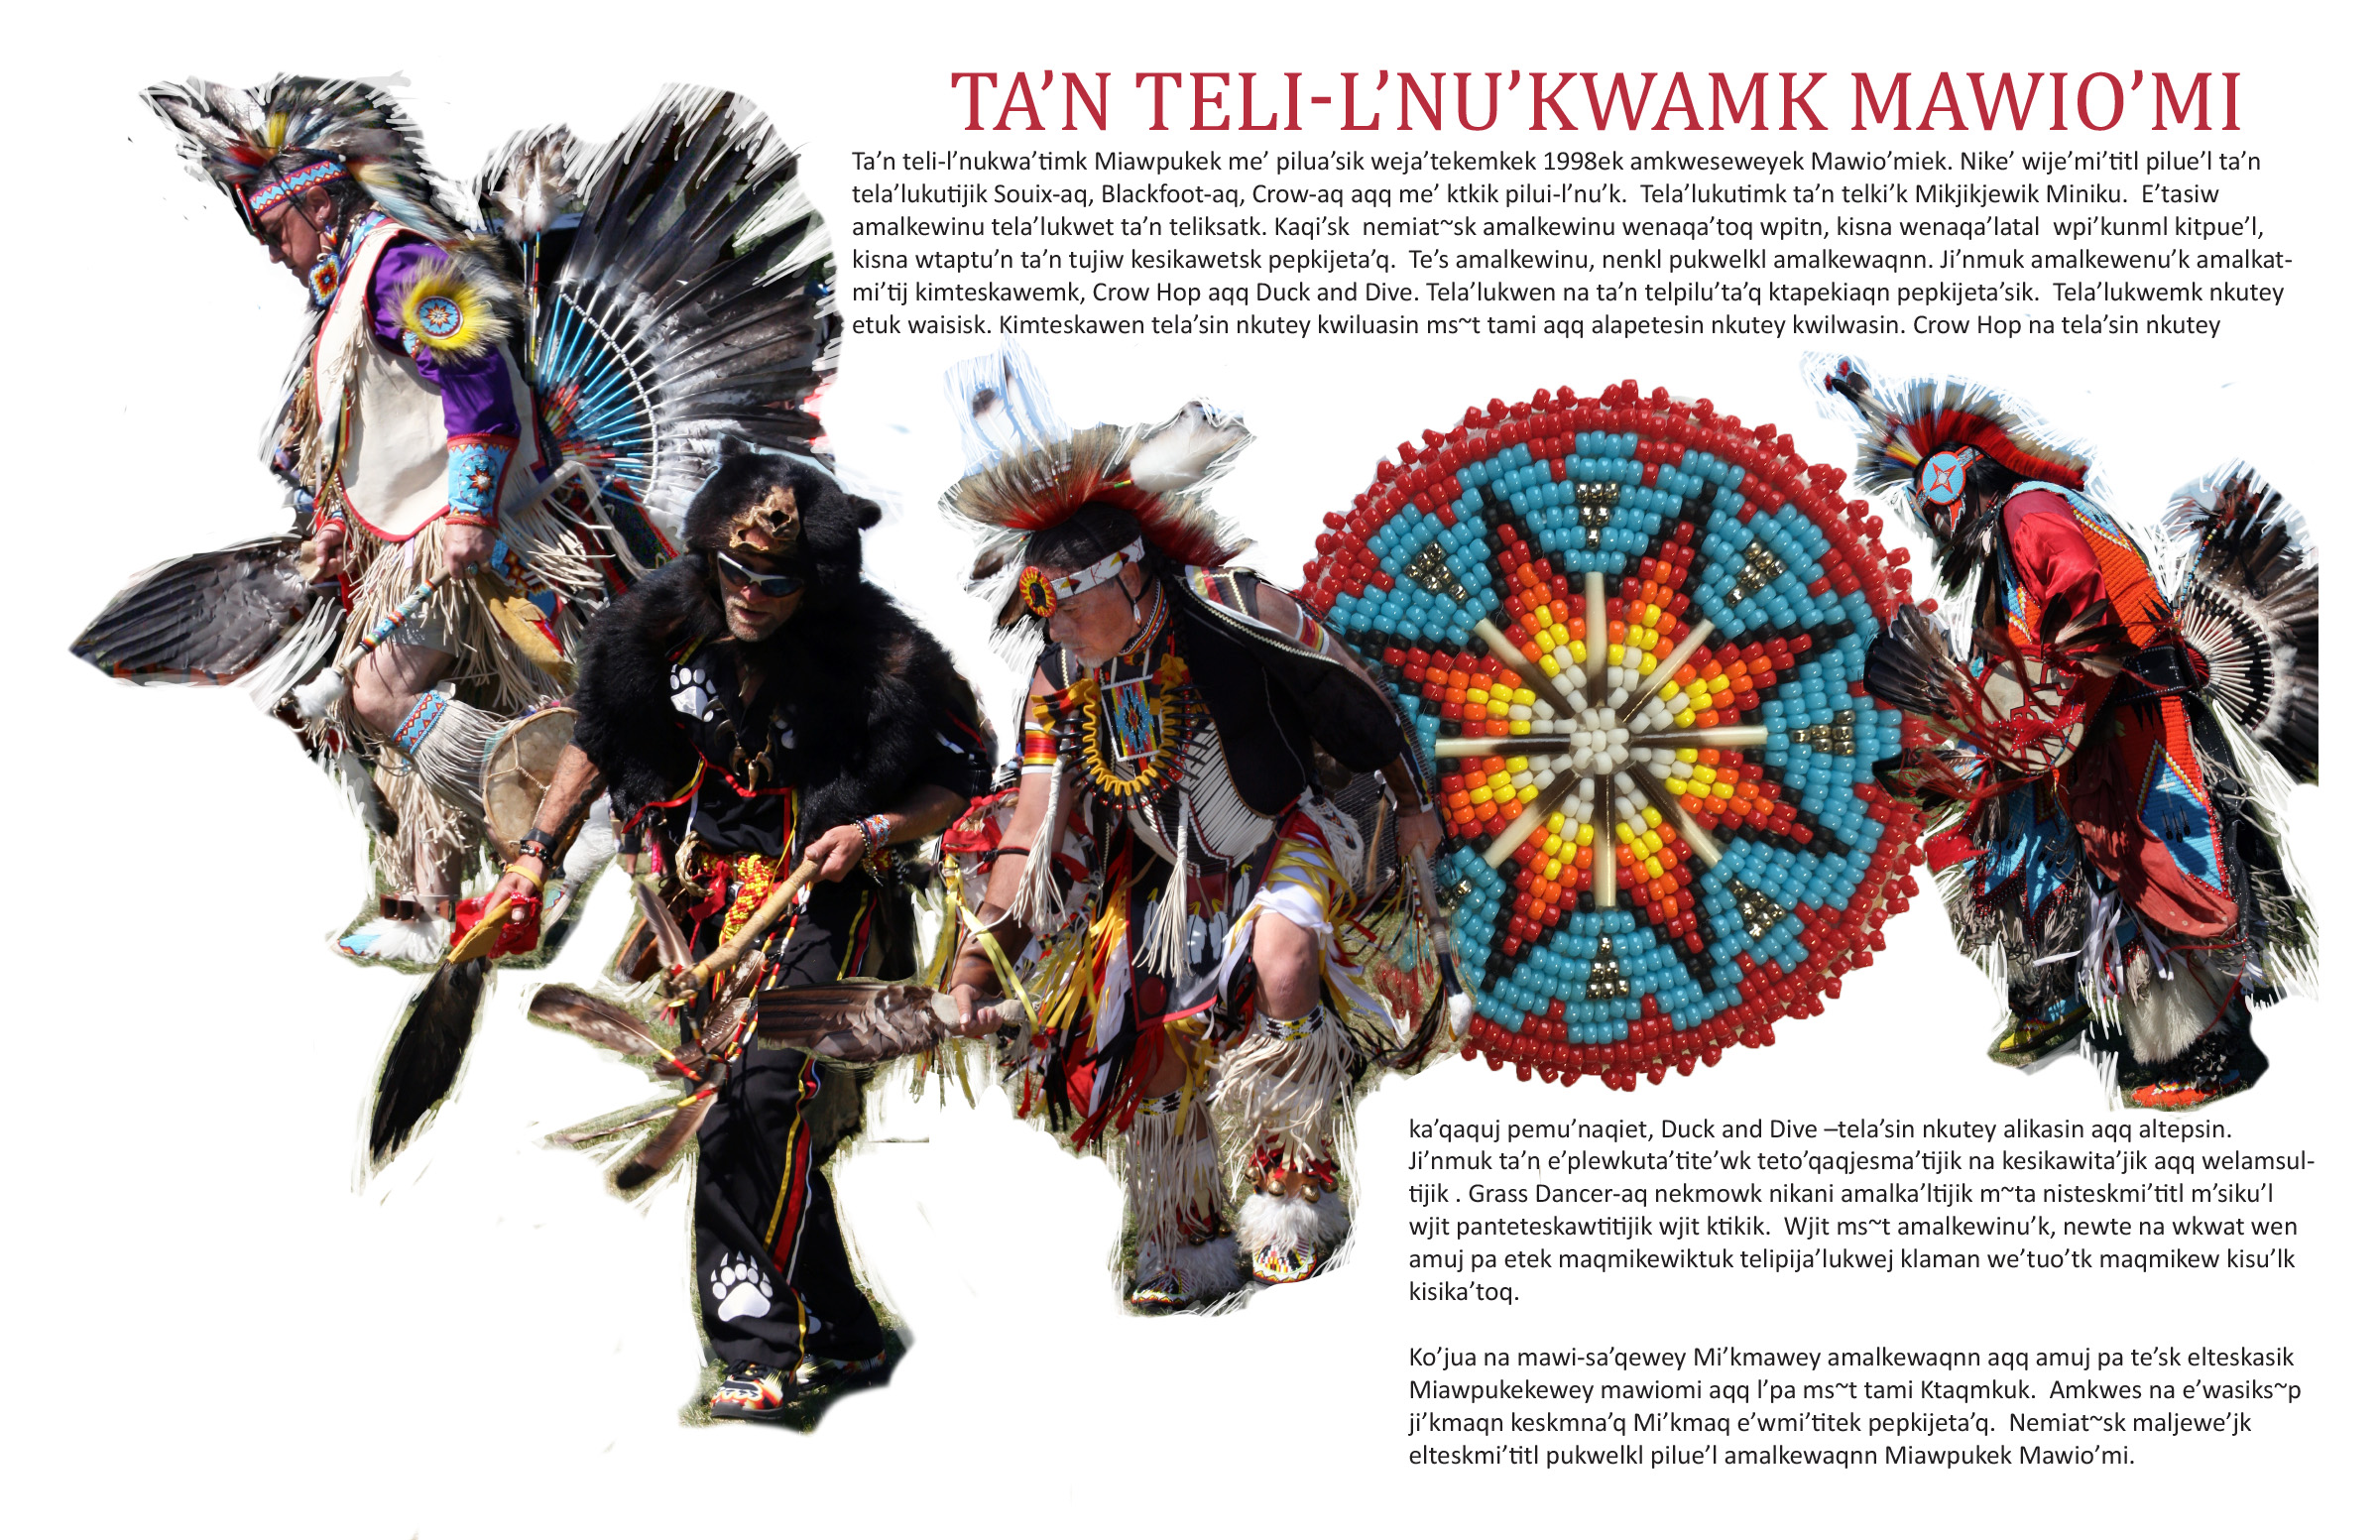 On The Diversity Of Powwow Dancing › Towards An Encyclopedia Of Local Knowledge